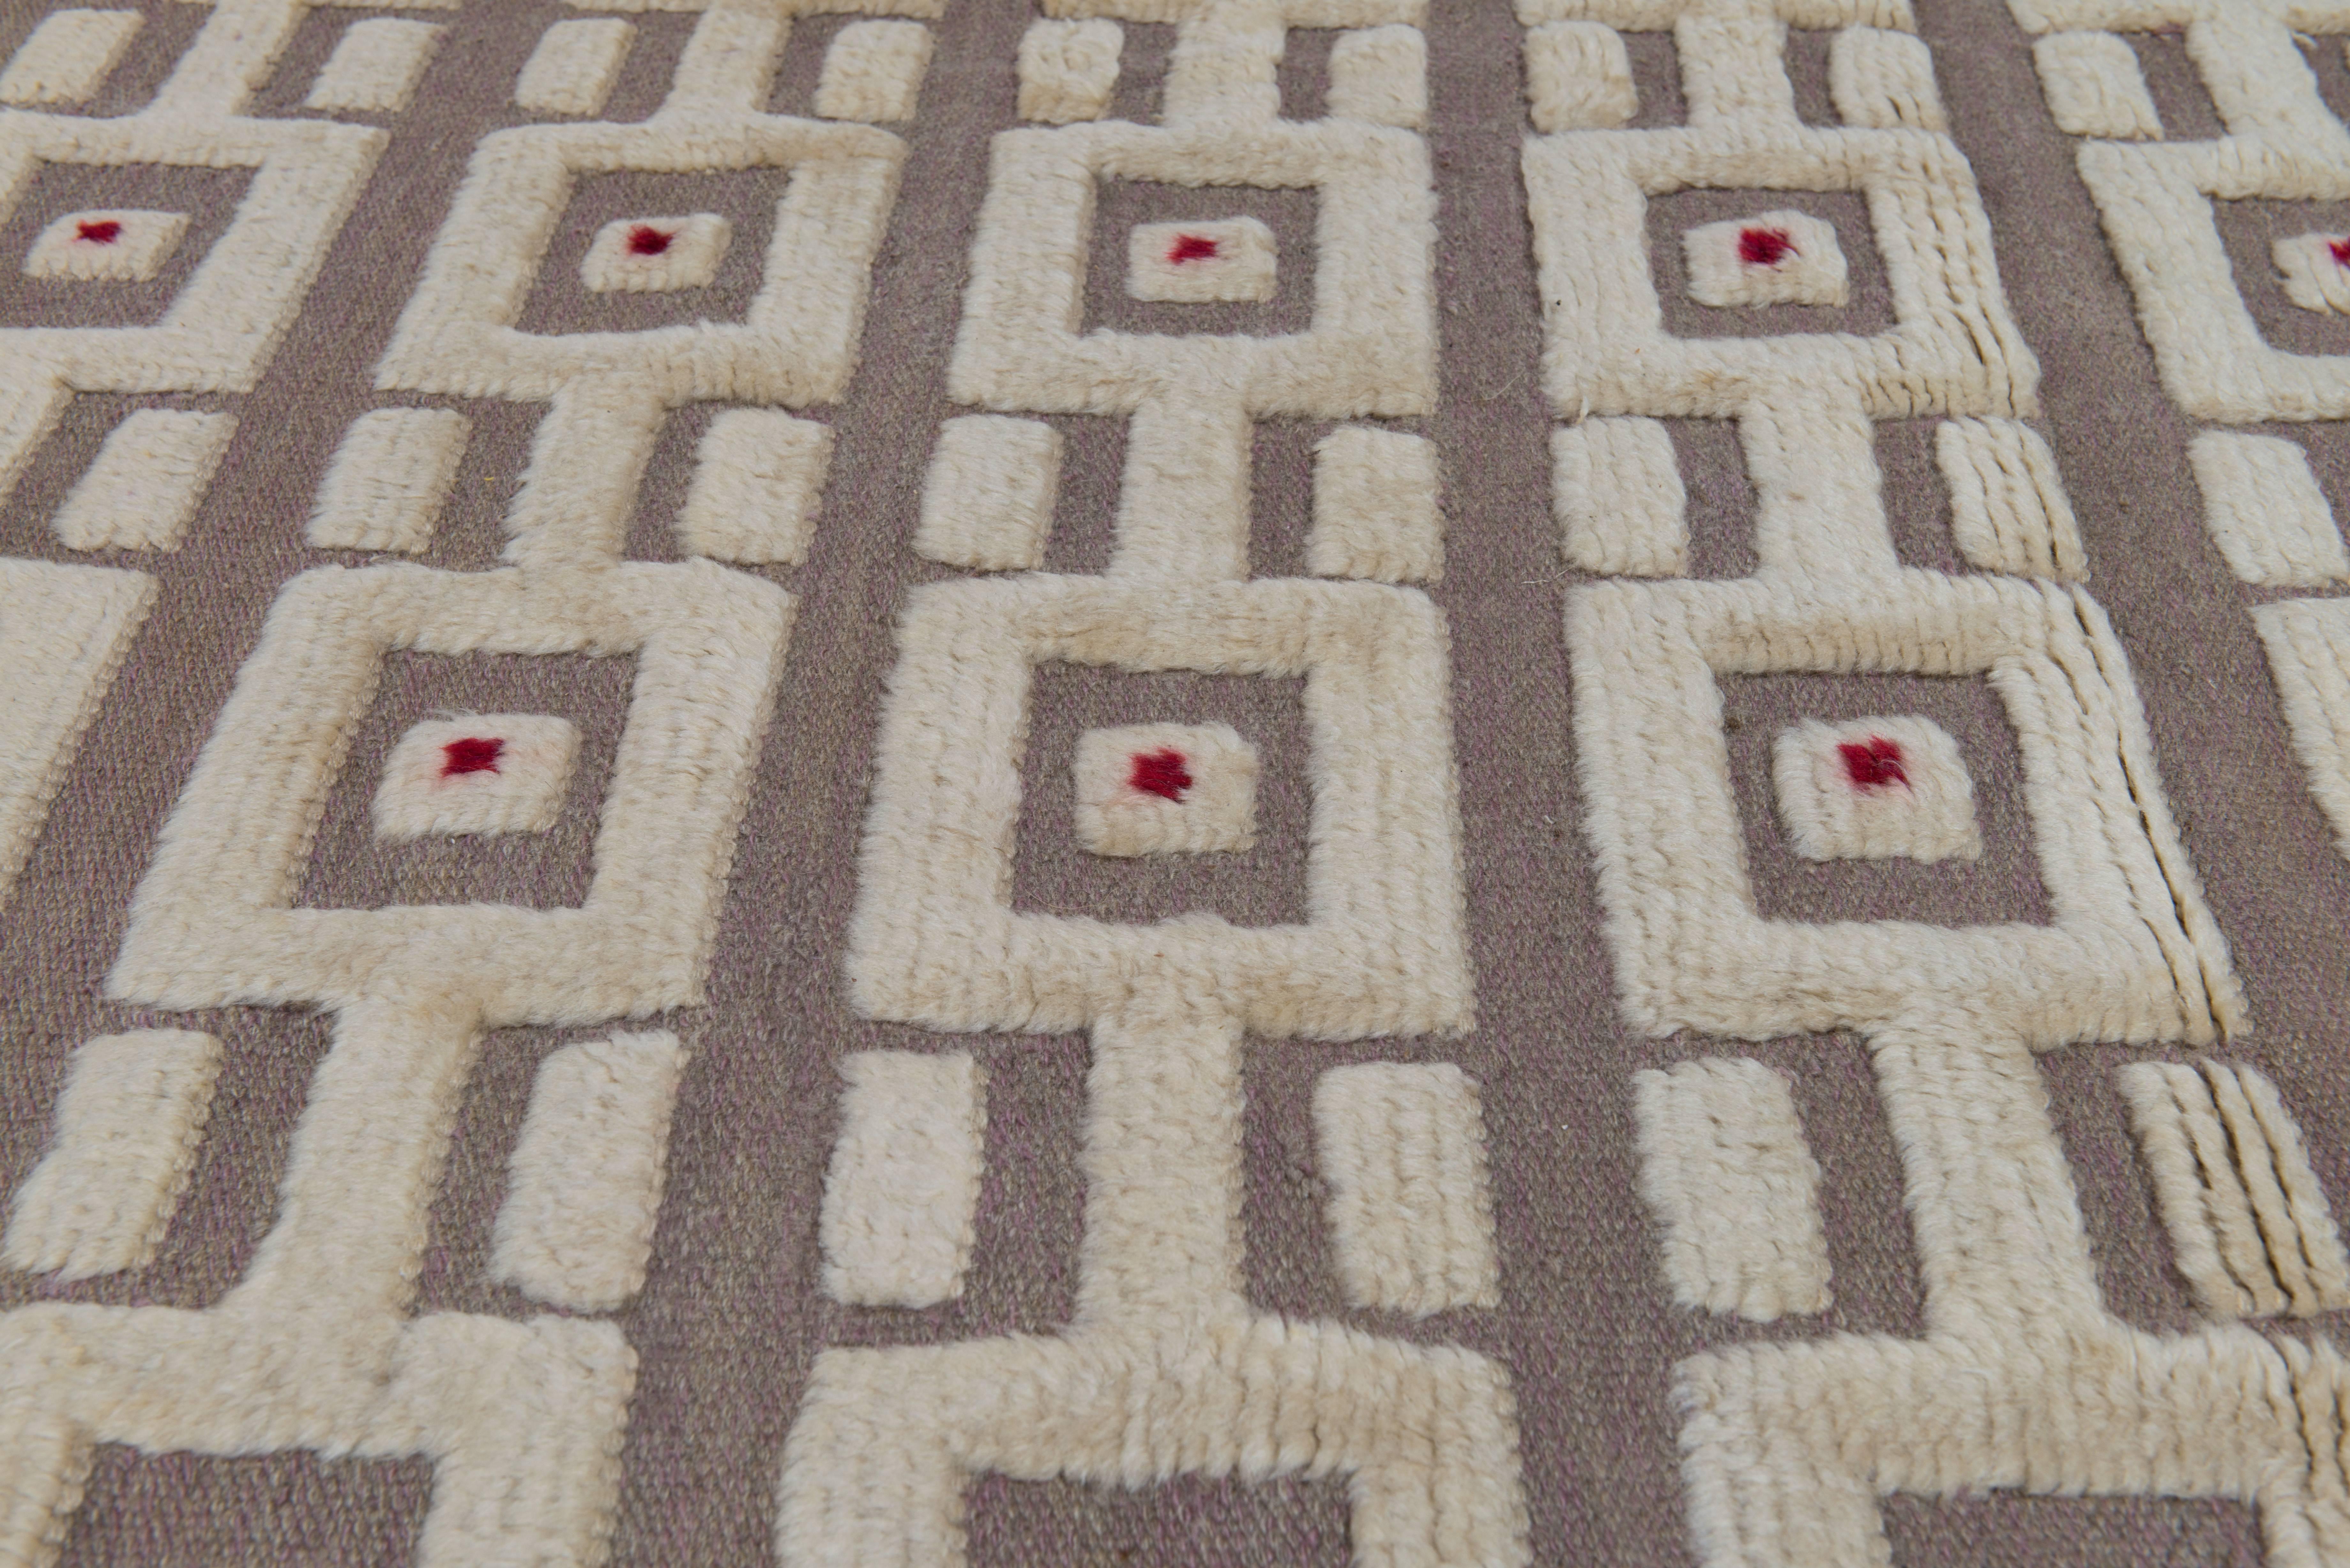 A truly beautiful and extremely rare example of a modernist Swedish carpet. A handwoven wool half pile carpet designed by Sigvard Bernadotte with wonderfully graphic motif in a elegant neutral palette with a contrasting red dot. One of Sweden's most